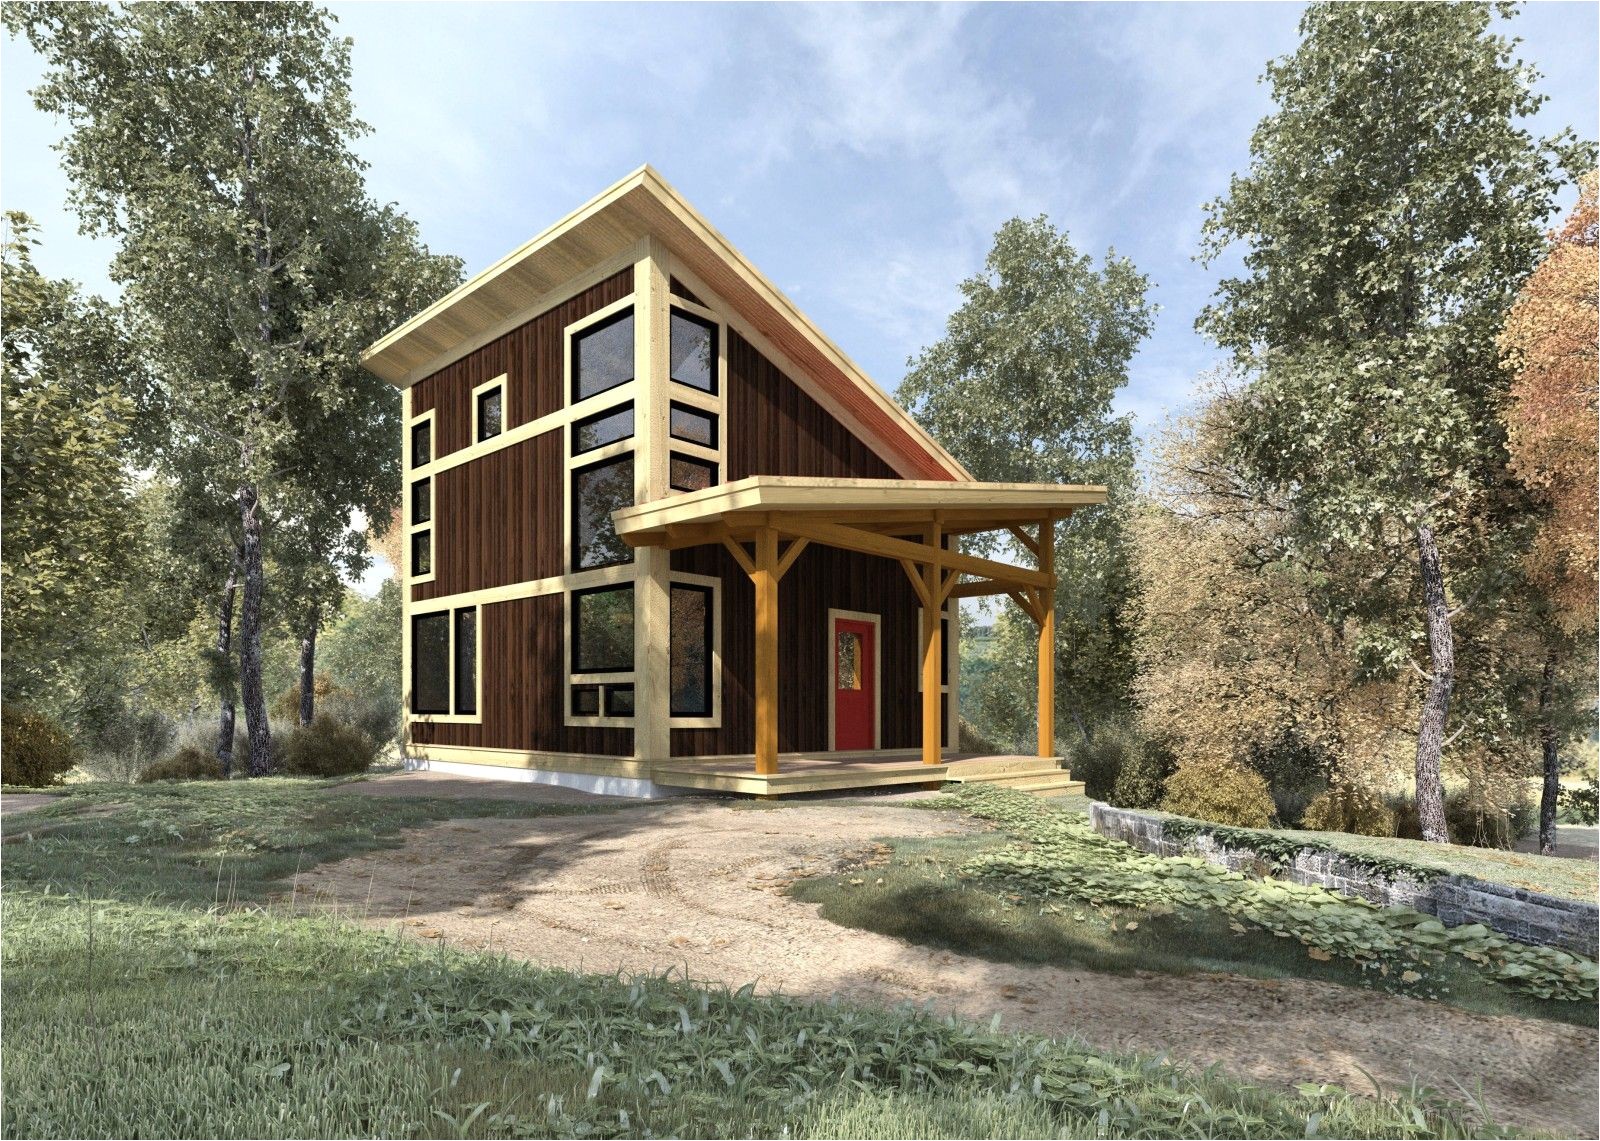 Small Timber Frame Home Plans Brookside 844 Sq Ft From the Cabin Series Of Timber